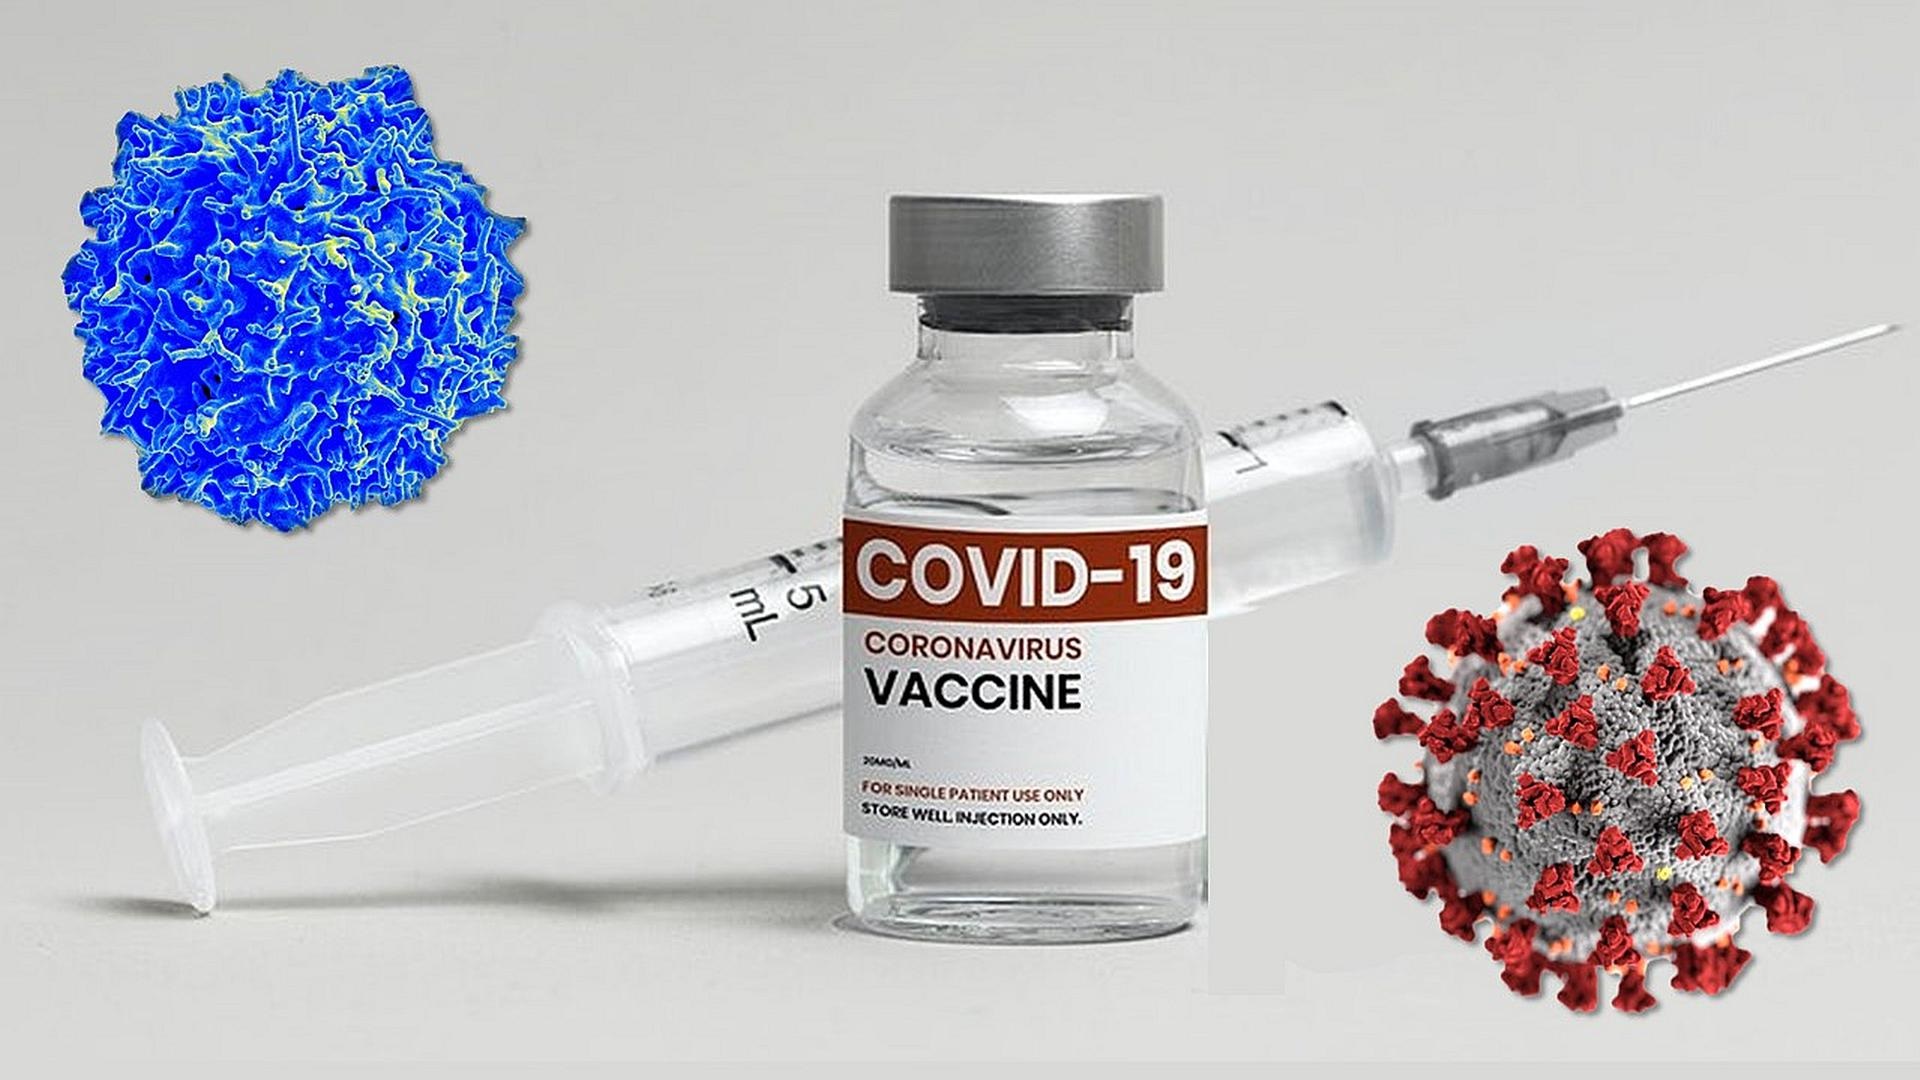 Corona vaccines are increasing the risk for those who have not been vaccinated